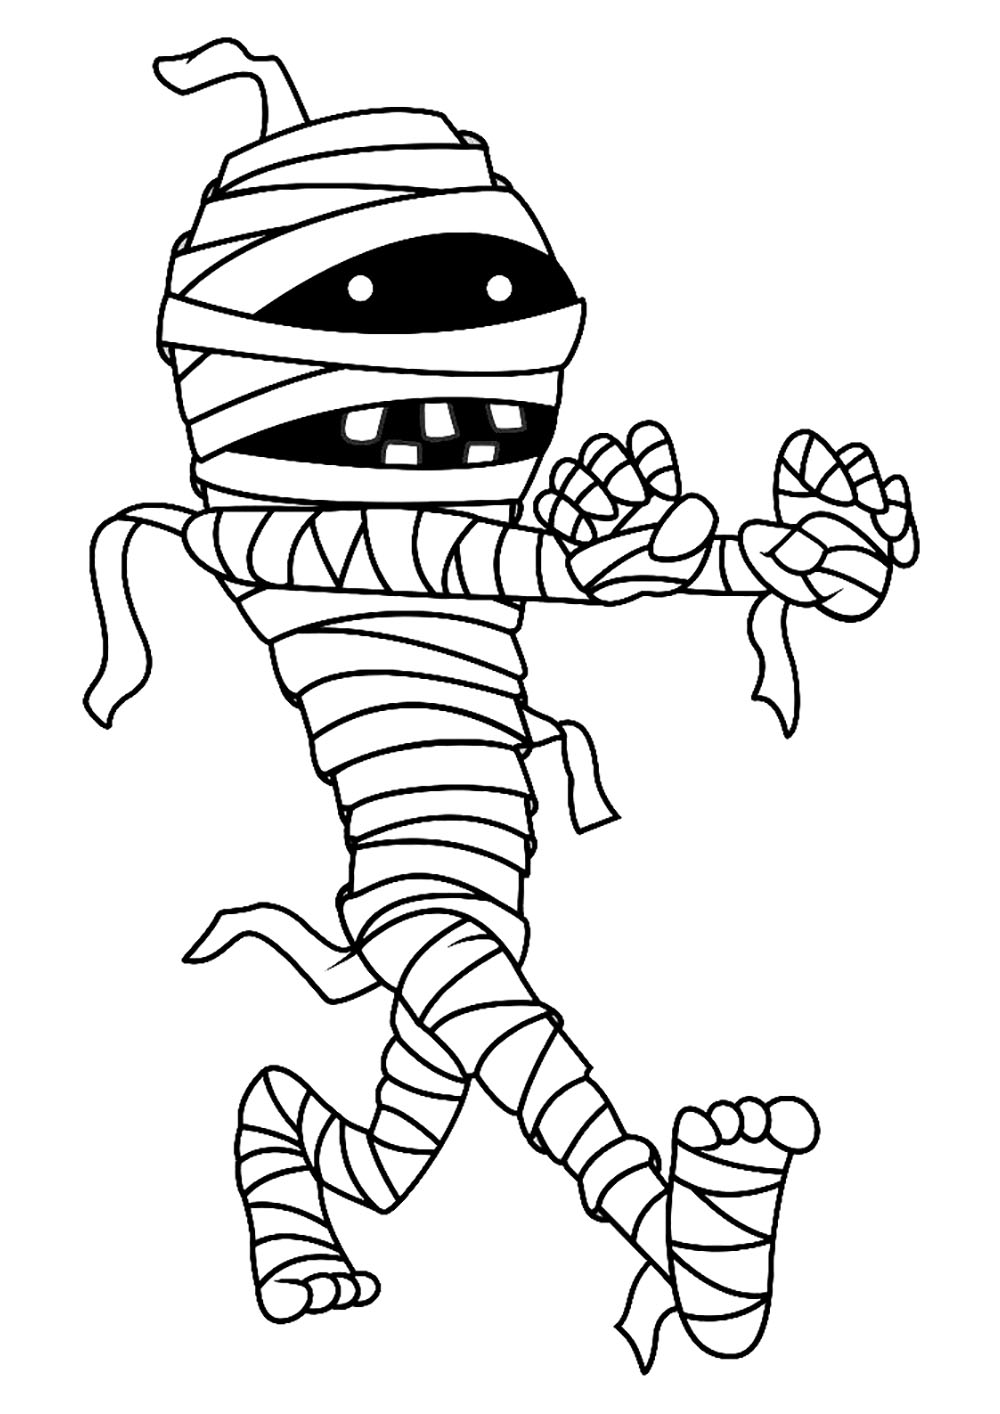 Halloween for children - Halloween Kids Coloring Pages